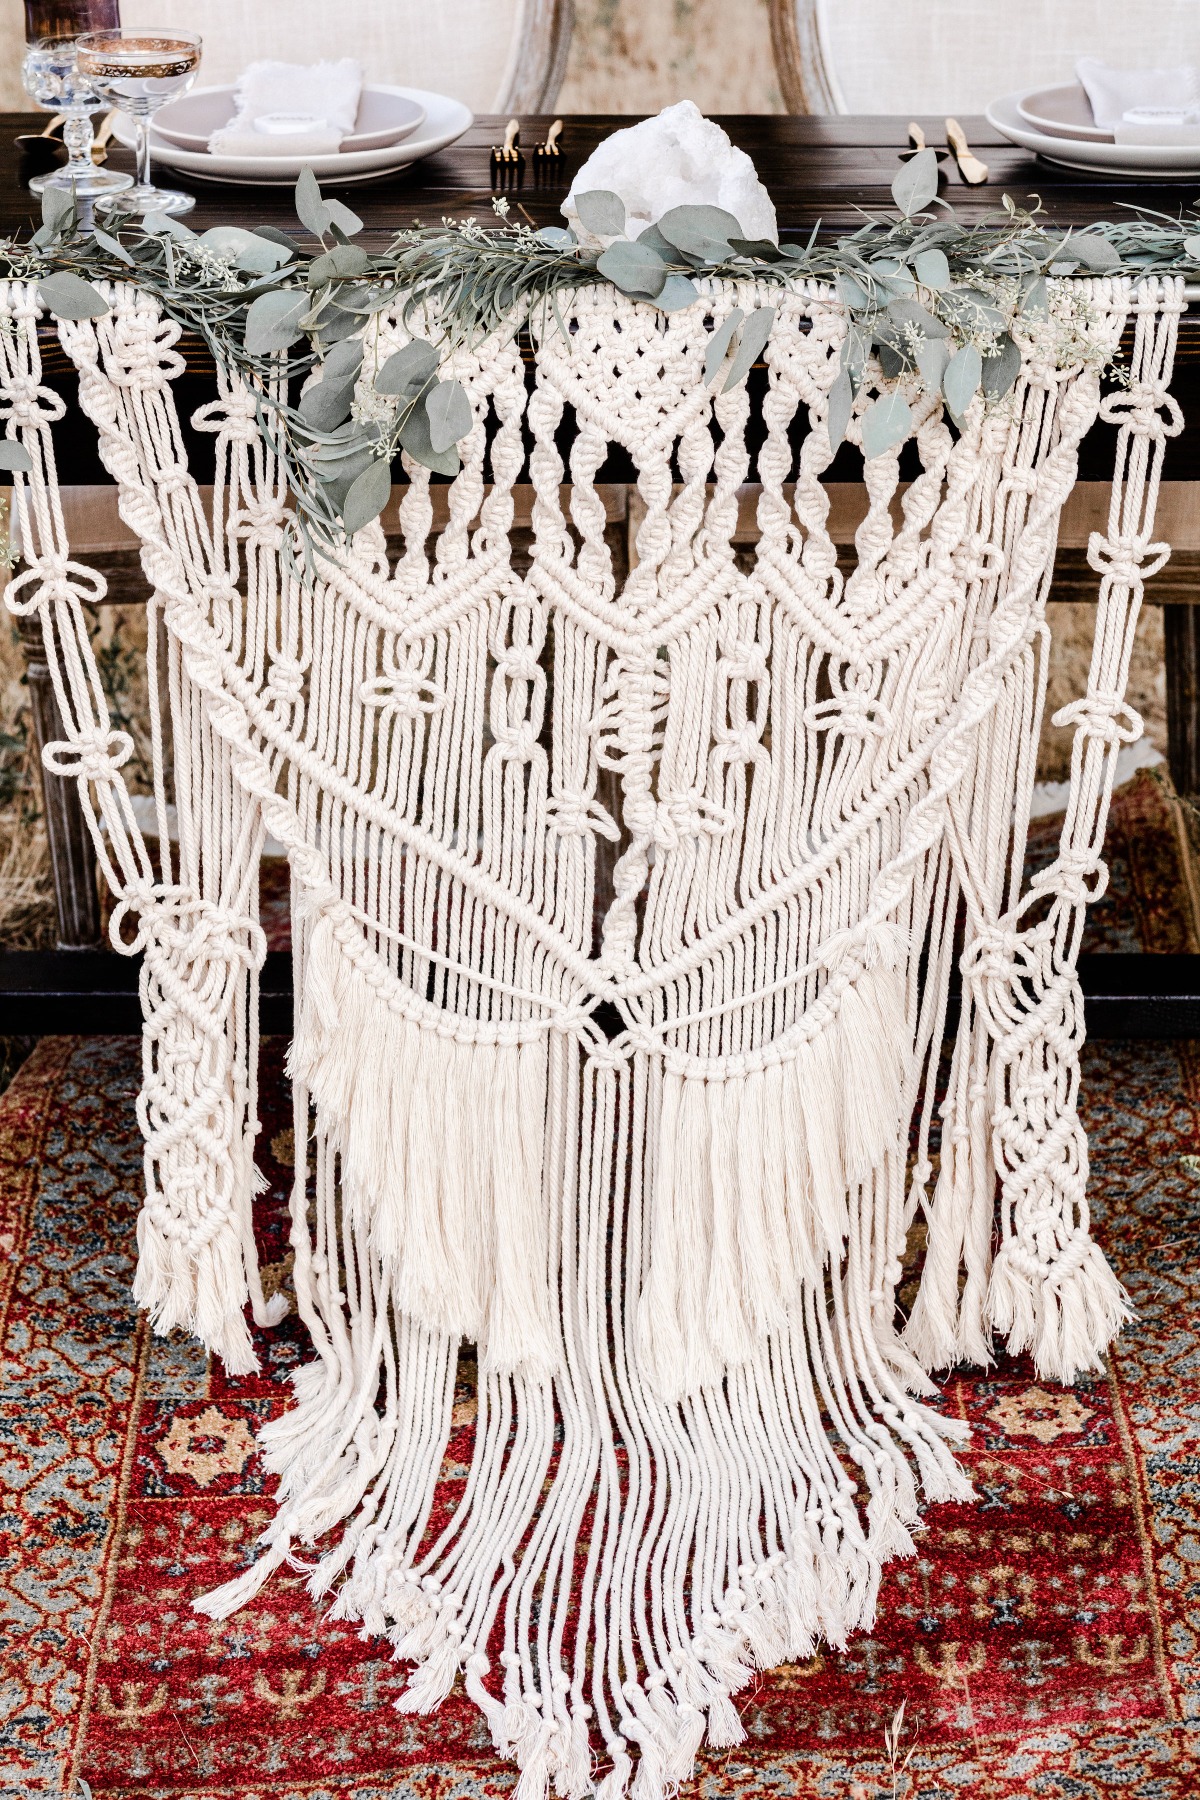 How To Use Macrame On Your Wedding Day